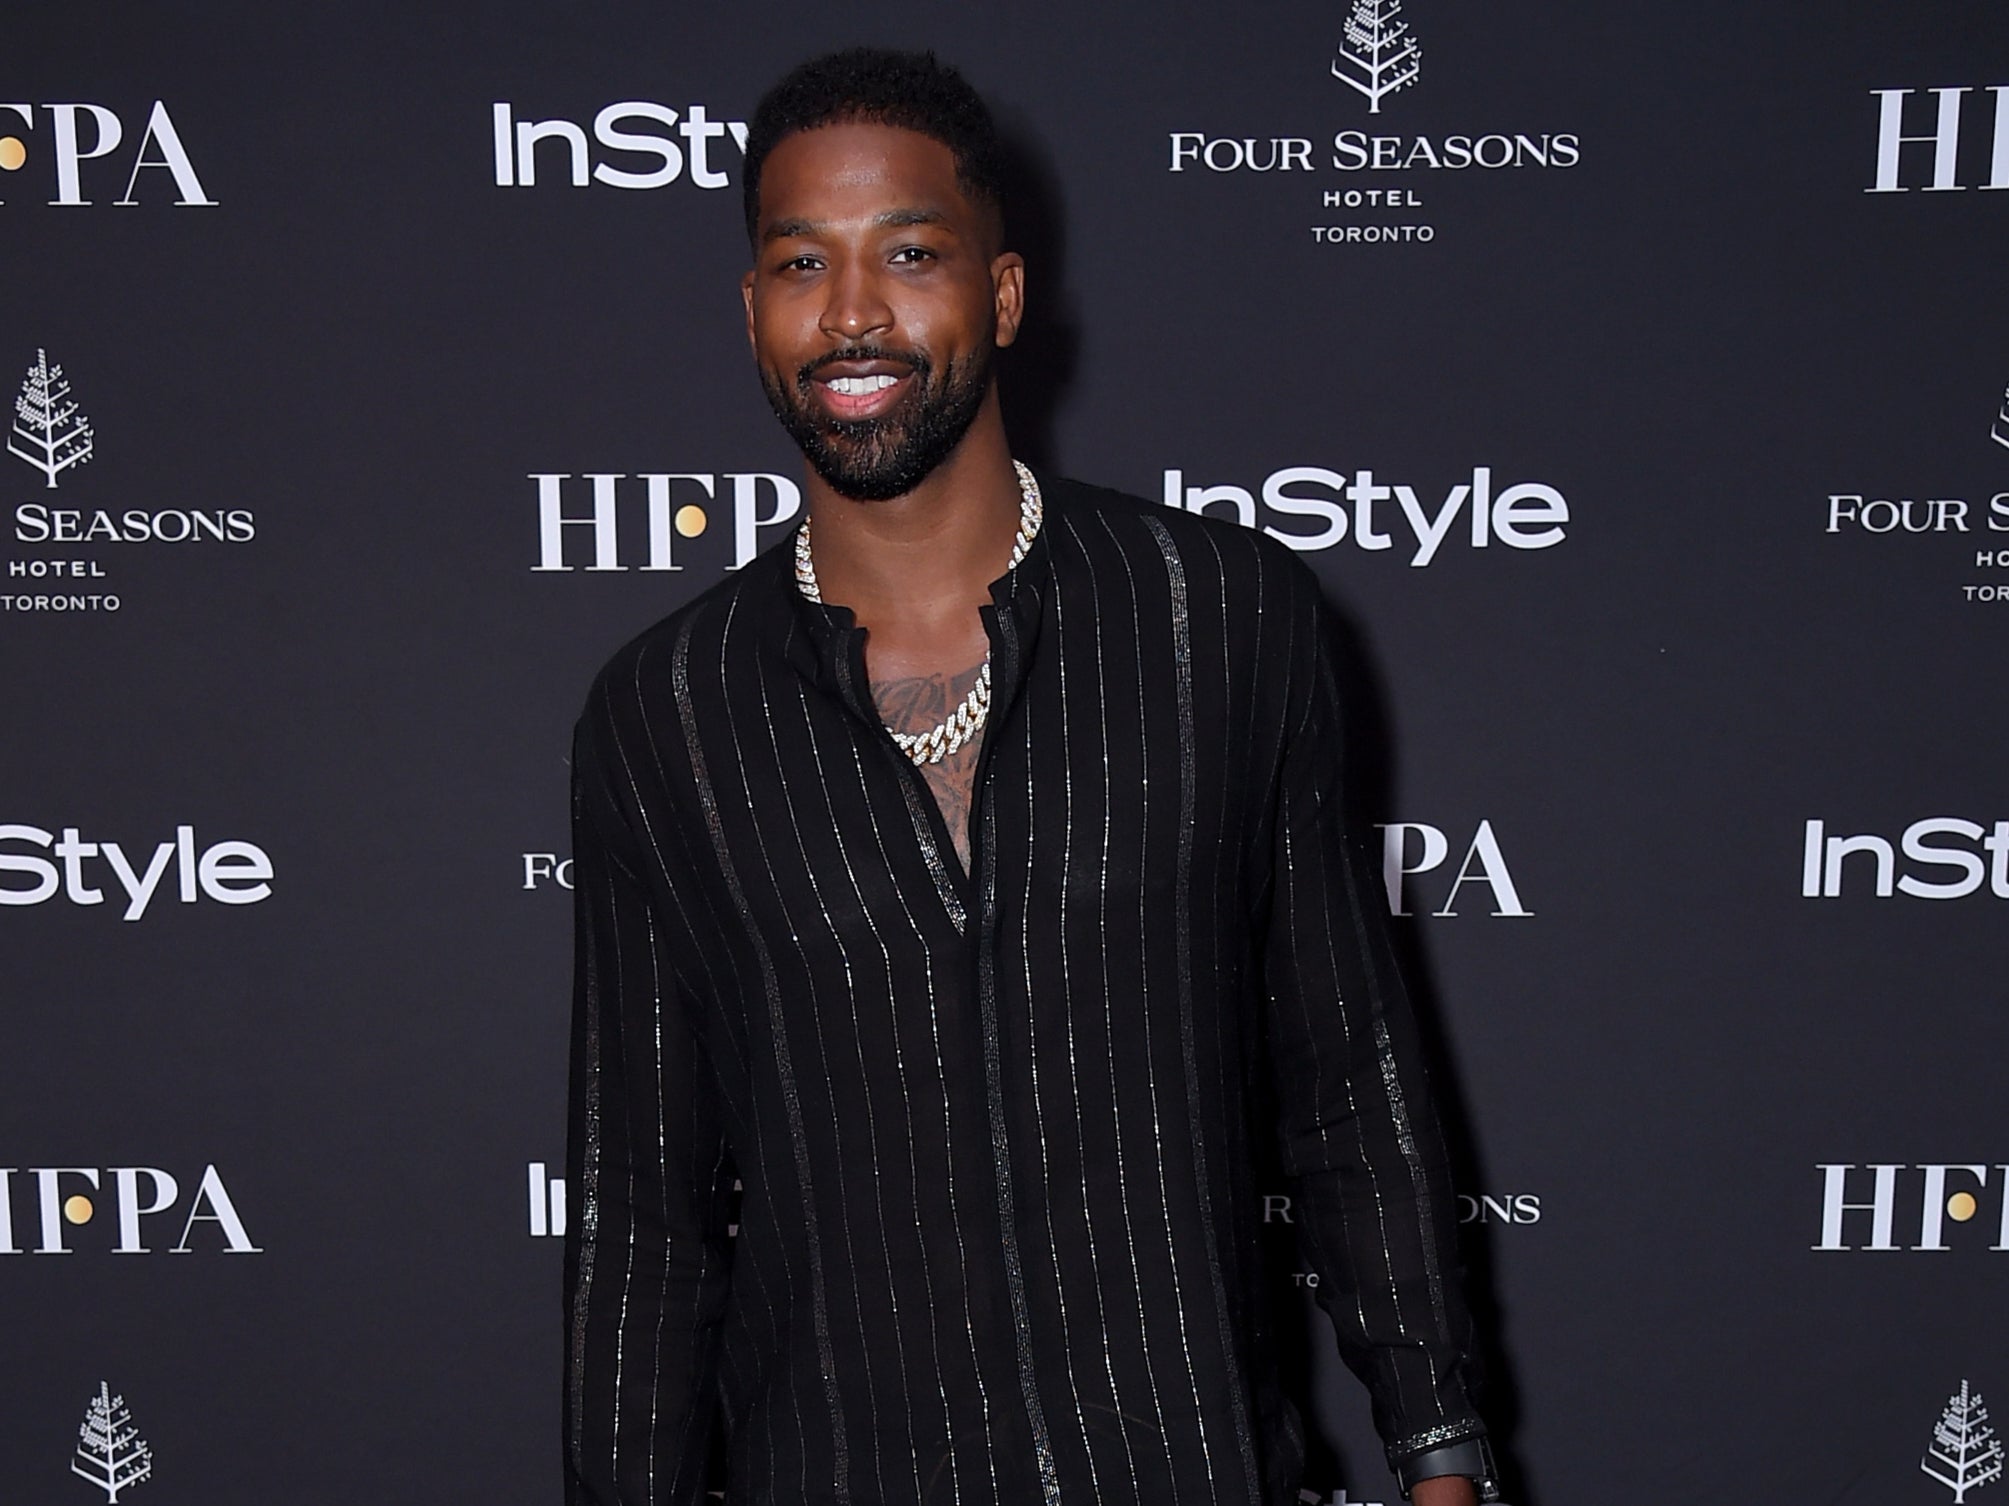 Tristan Thompson, 31, was previously dating Khloe Kardashian, with whom he shares four-year-old daughter True and a baby boy